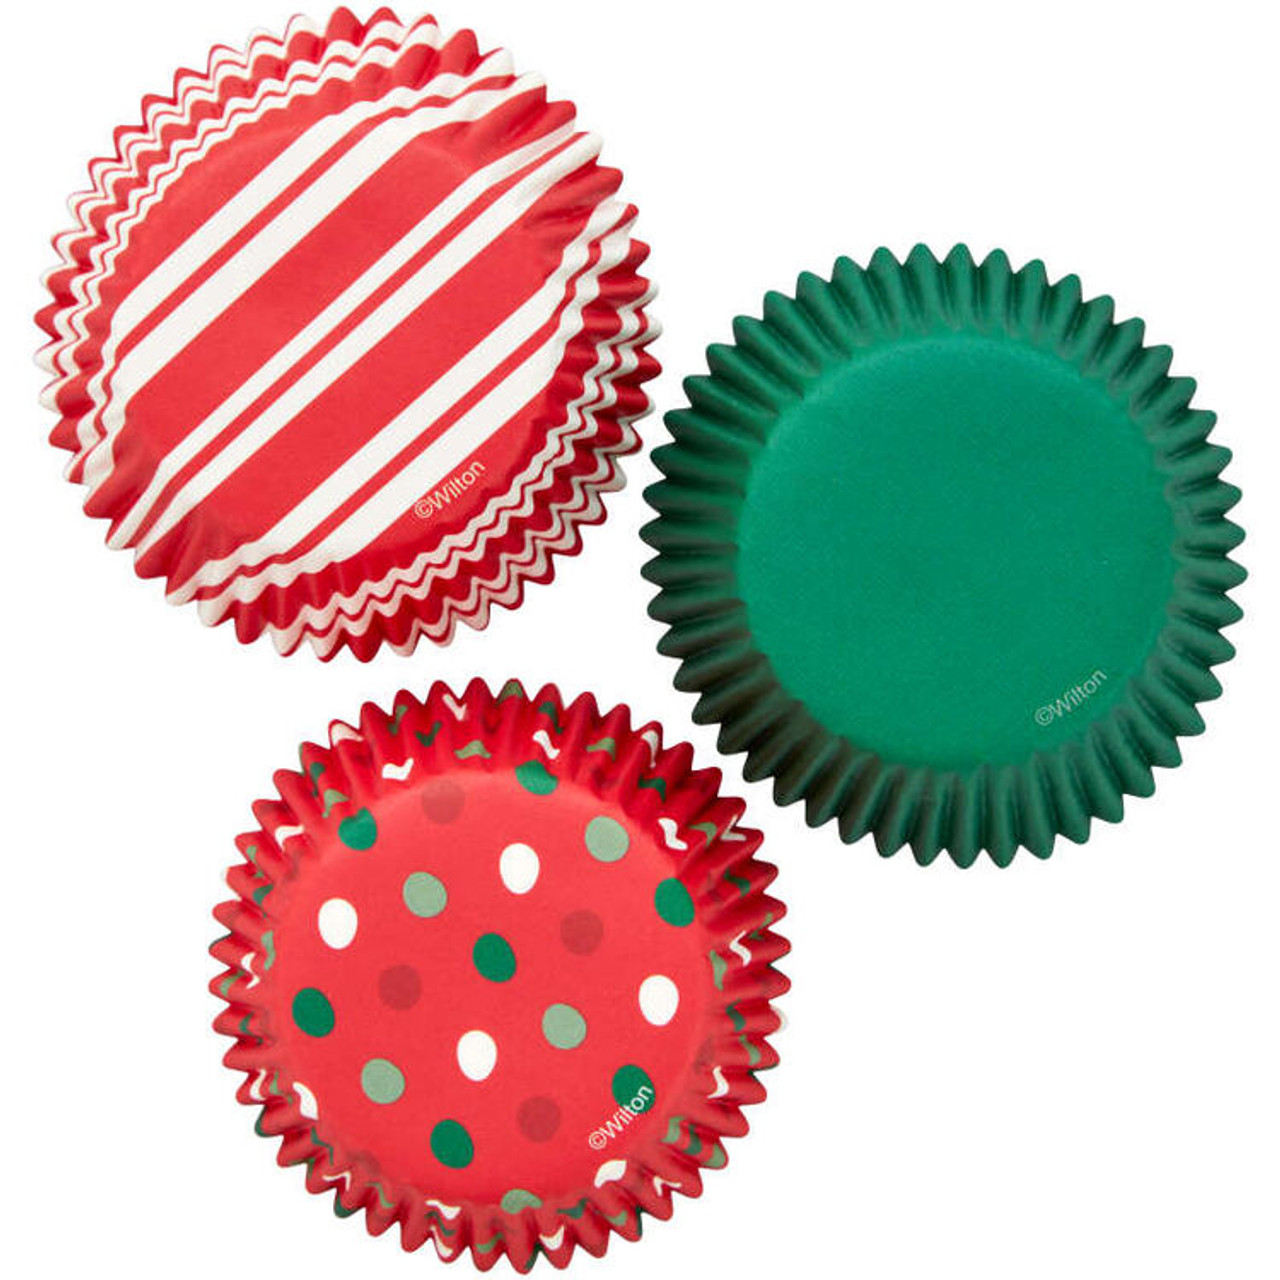 https://cdn11.bigcommerce.com/s-w8h1g5/images/stencil/1280x1280/products/13259/36446/191010576-Wilton-Red-Green-and-White-Patterned-Paper-Christmas-Cupcake-Liners-75-Count-A3__10594.1670208107.jpg?c=2